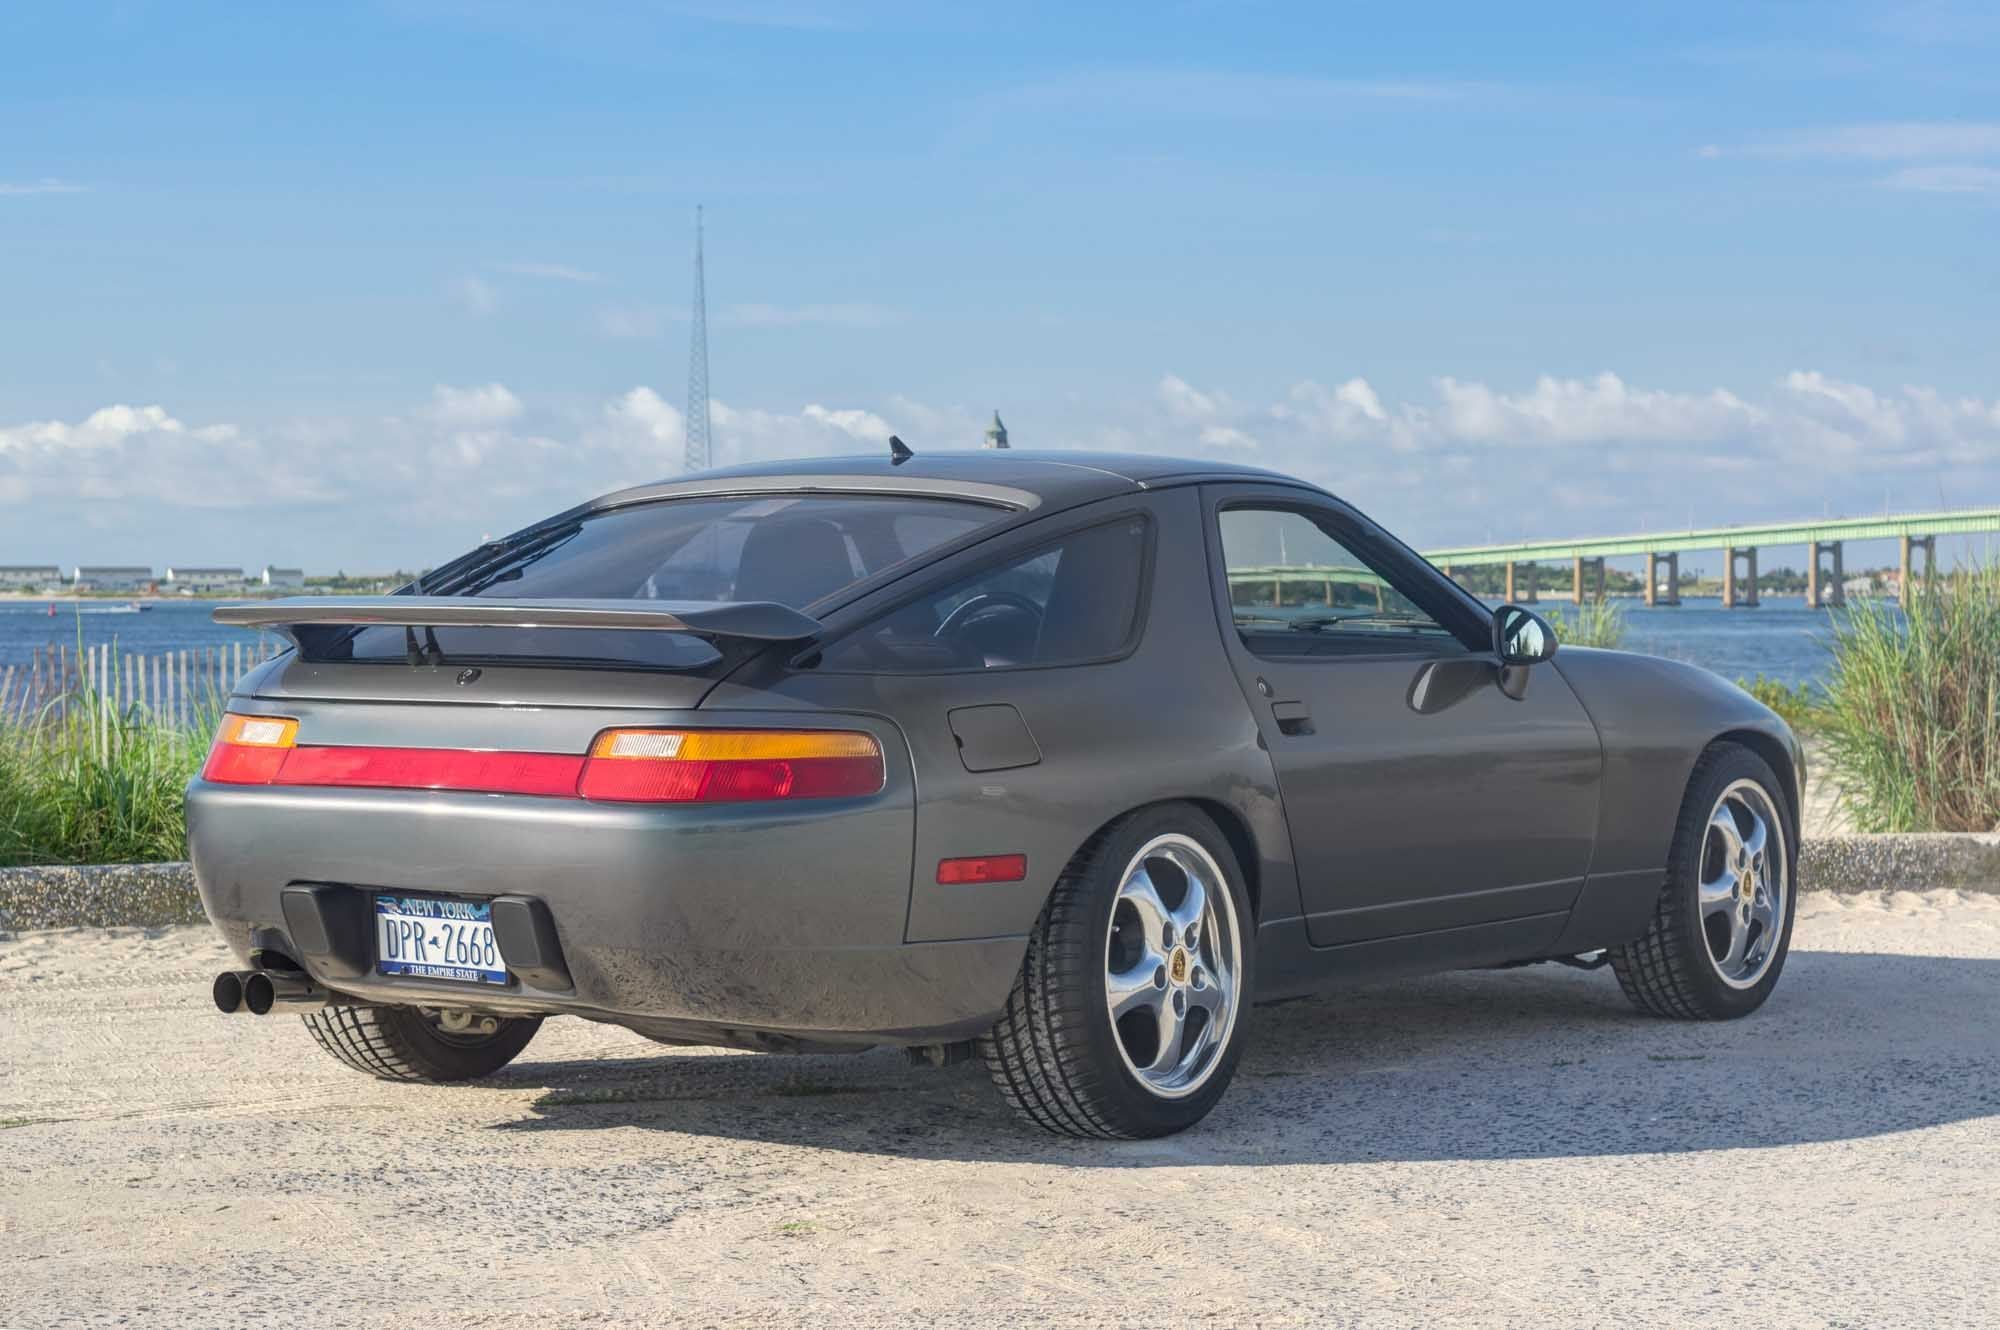 1993 Porsche 928 - 1993, 928, GTS - Used - VIN WP0AA2922PS820127 - 85,300 Miles - 8 cyl - 2WD - Automatic - Hatchback - Gray - Sound Beach, NY 11789, United States